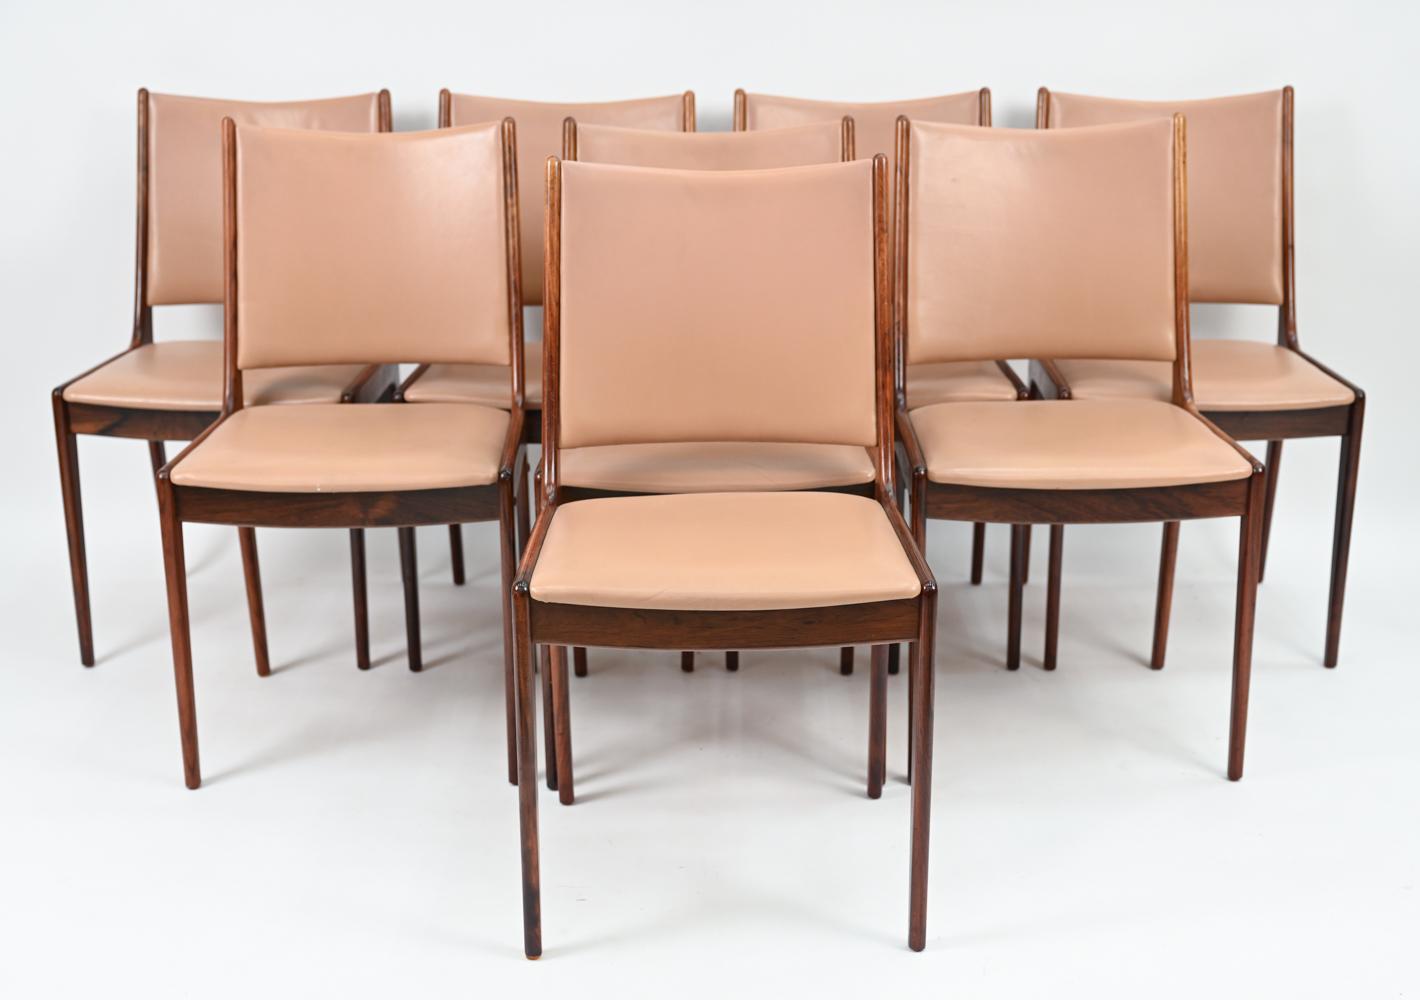 A gorgeous set of eight Danish mid-century dining side chairs, designed by Johannes Andersen and produced by Uldum Mobelfabrik. These Model 7171 chairs feature attractive, refined frames in warm hued rosewood with gently sloping sides. Subtly curved